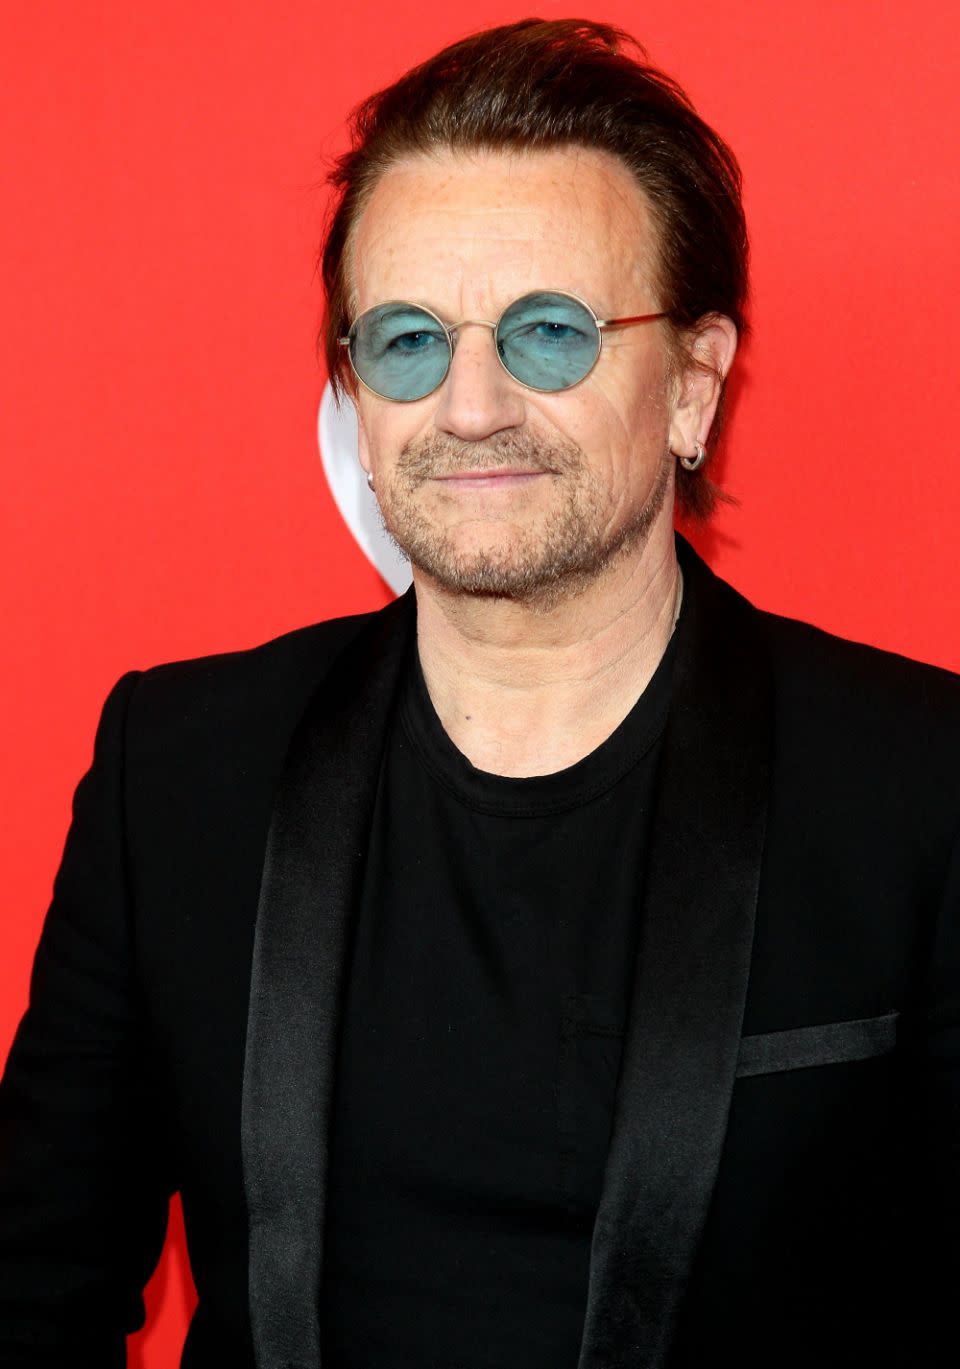 Bono even speaks about the late rockstar in the documentary. Source: Getty